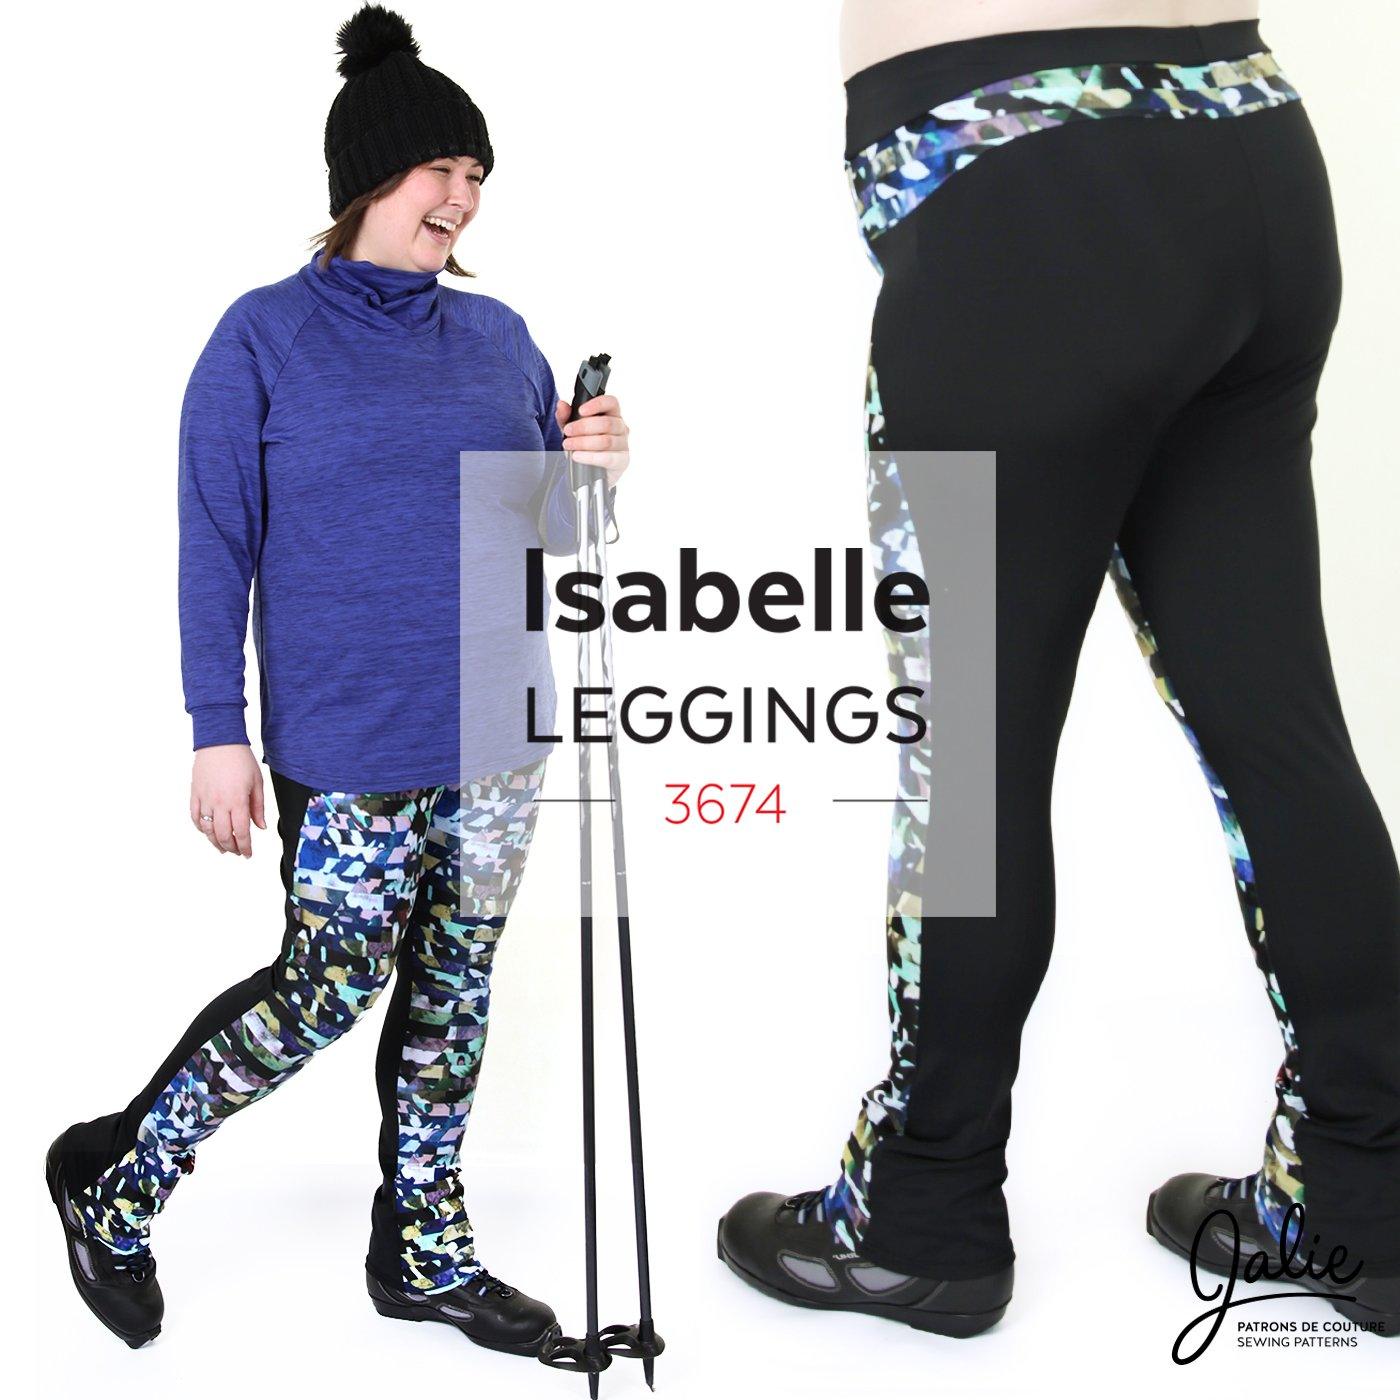 Isabelle Leggings and Skating Pants Sewing Pattern by Jalie – The